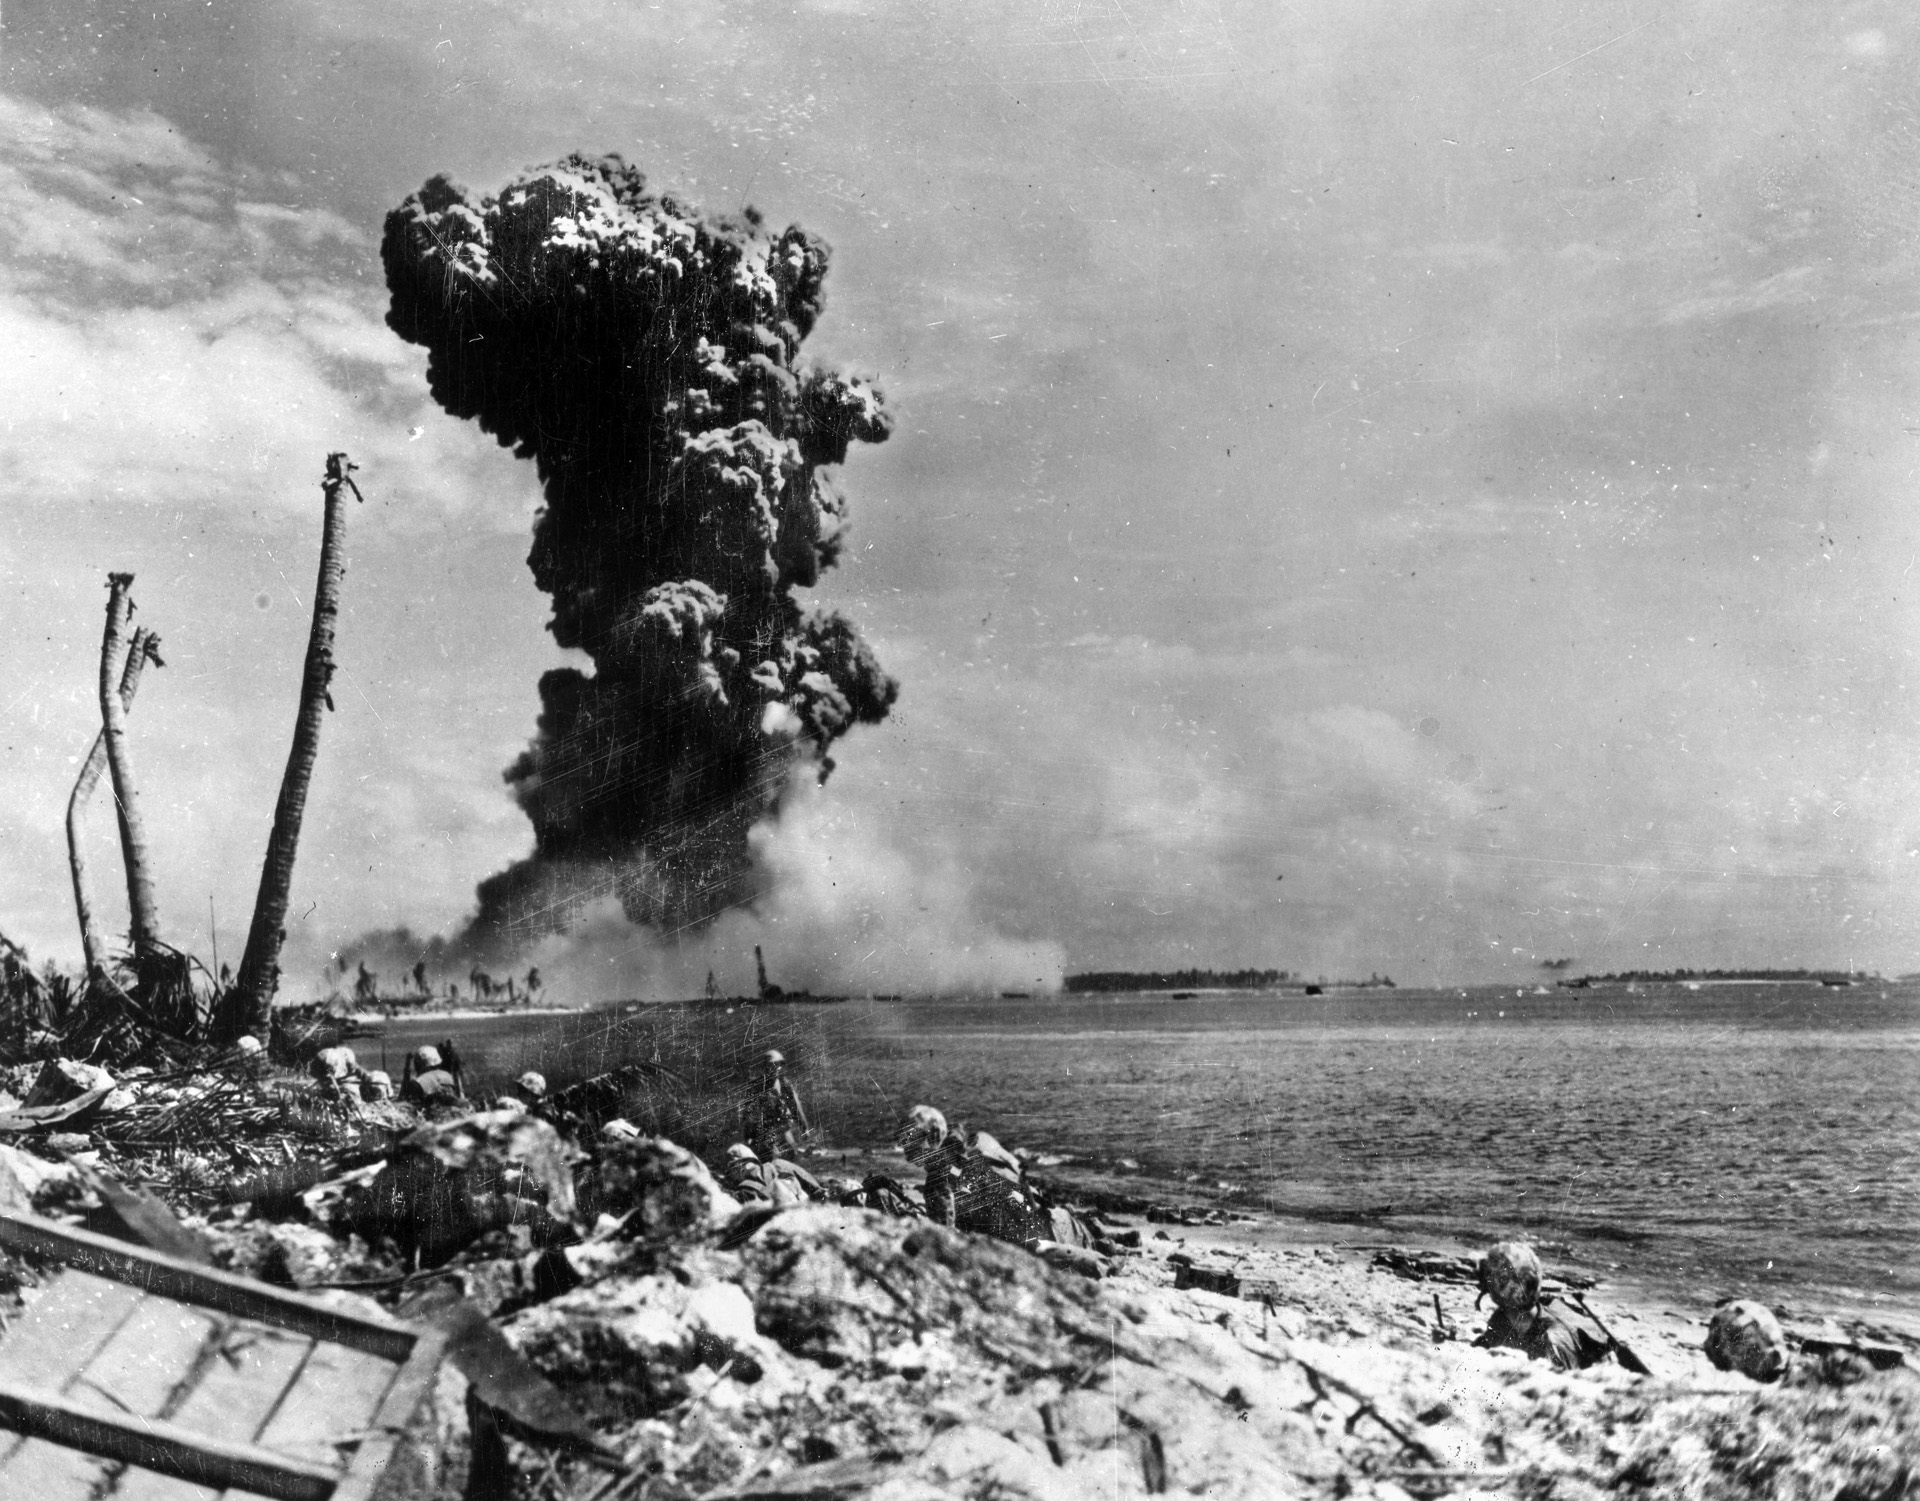 Having taken cover on the beach at Roi, American Marines look across the lagoon toward Namur as a huge explosion destroys a Japanese bunker. Marines on the adjacent island had placed a satchel charge to destroy the bunker, and its demolition ignited an ammunition storage area with spectacular results.